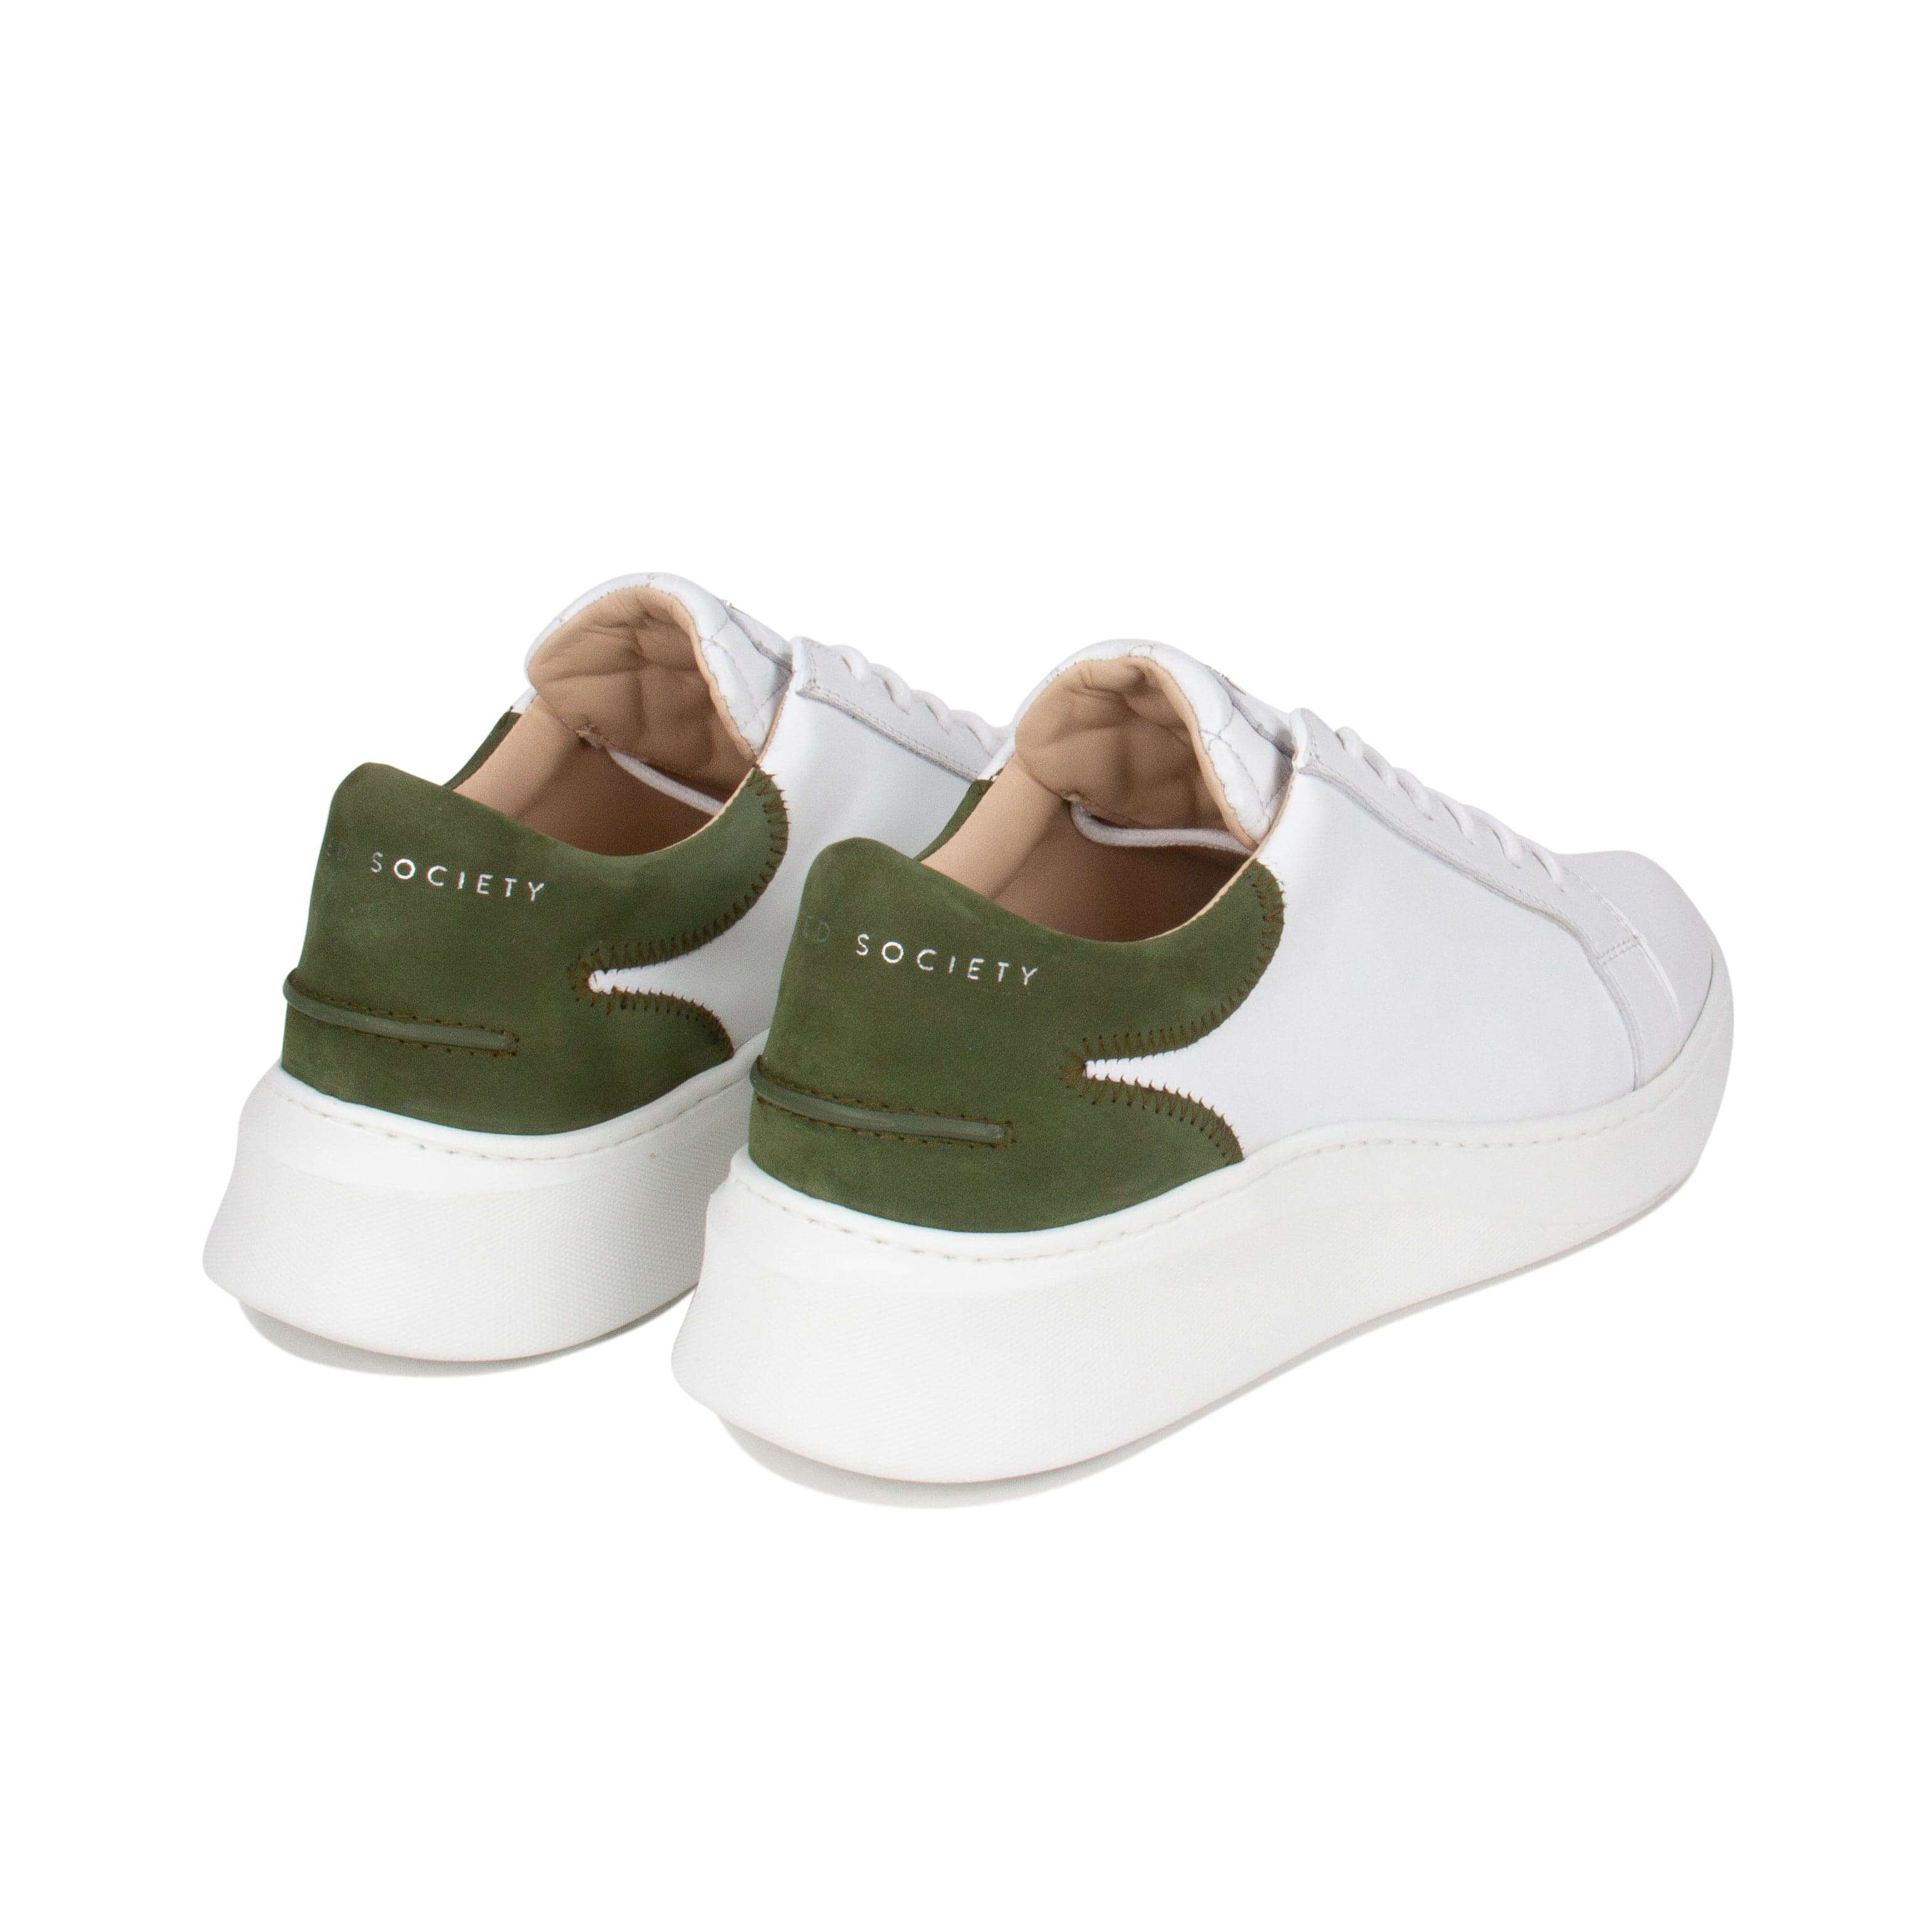 Matteo Low Top Sneaker | White & Olive Full Grain Leather | White Outsole | Made in Italy | Size 42